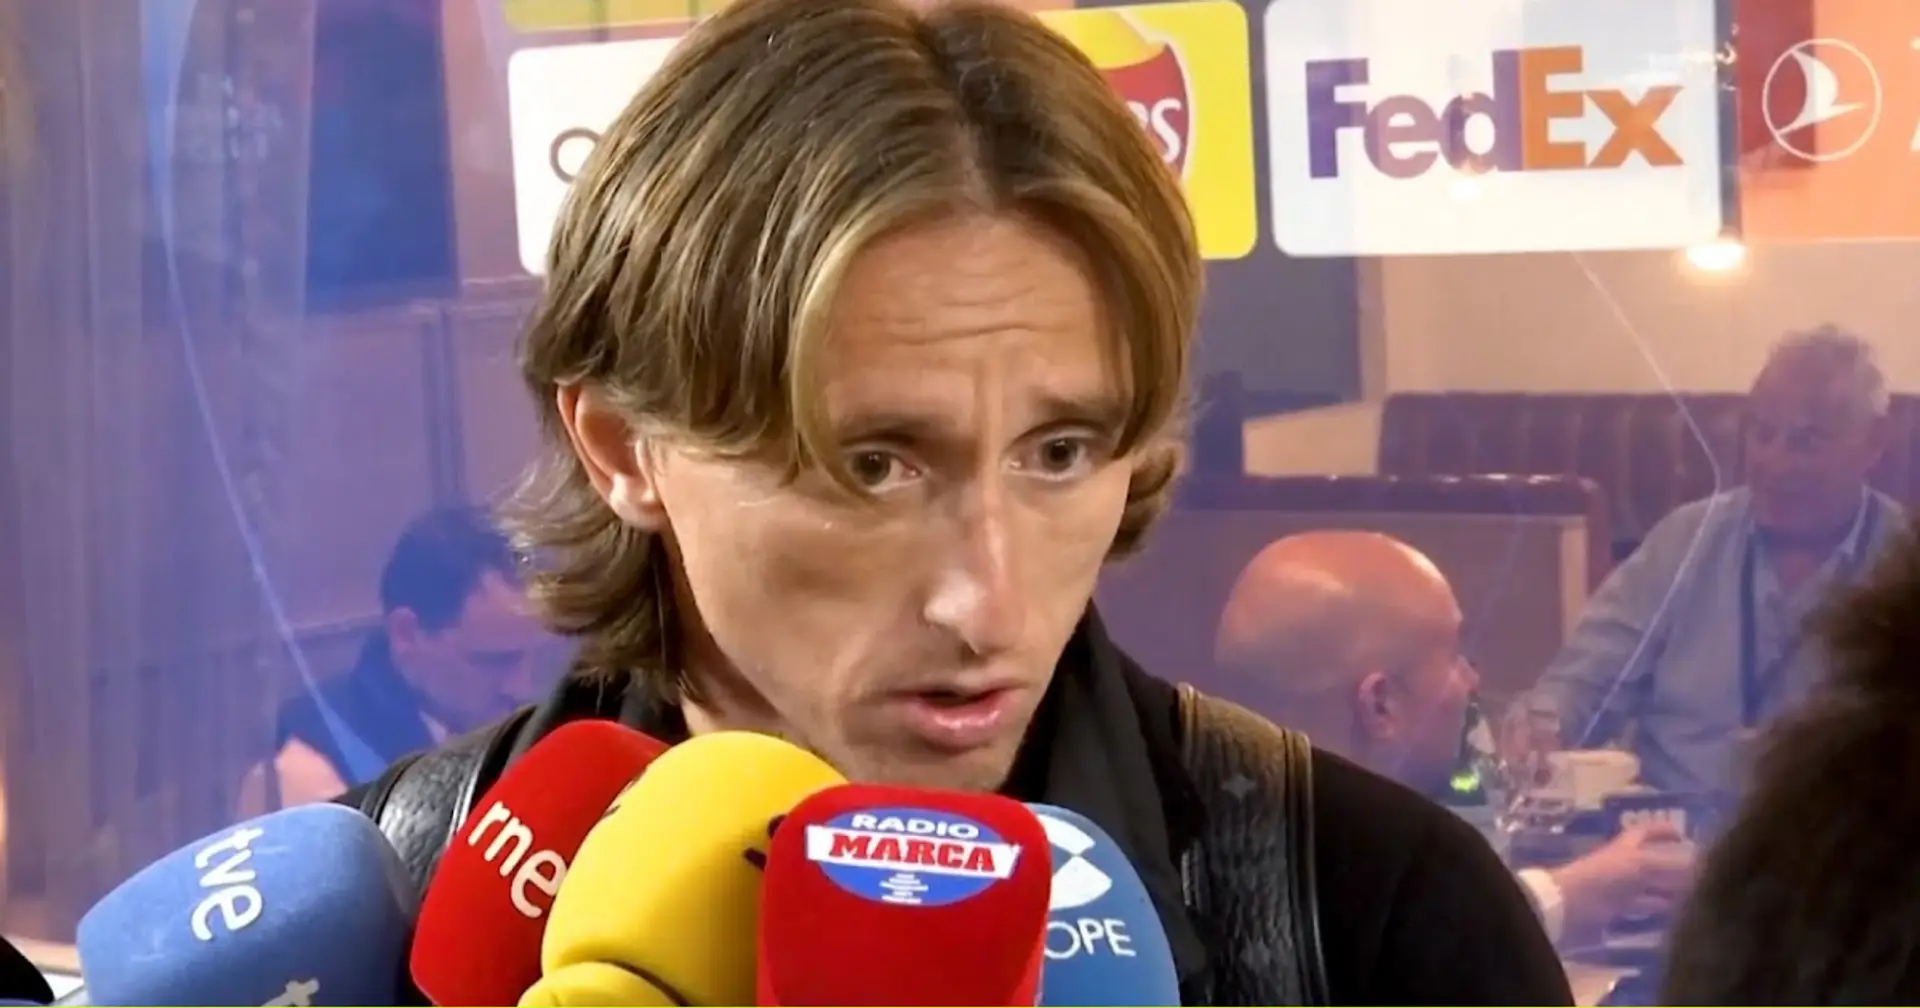 JUST IN: Luka Modric tells Real Madrid he wants to leave after crazy offer from Saudi